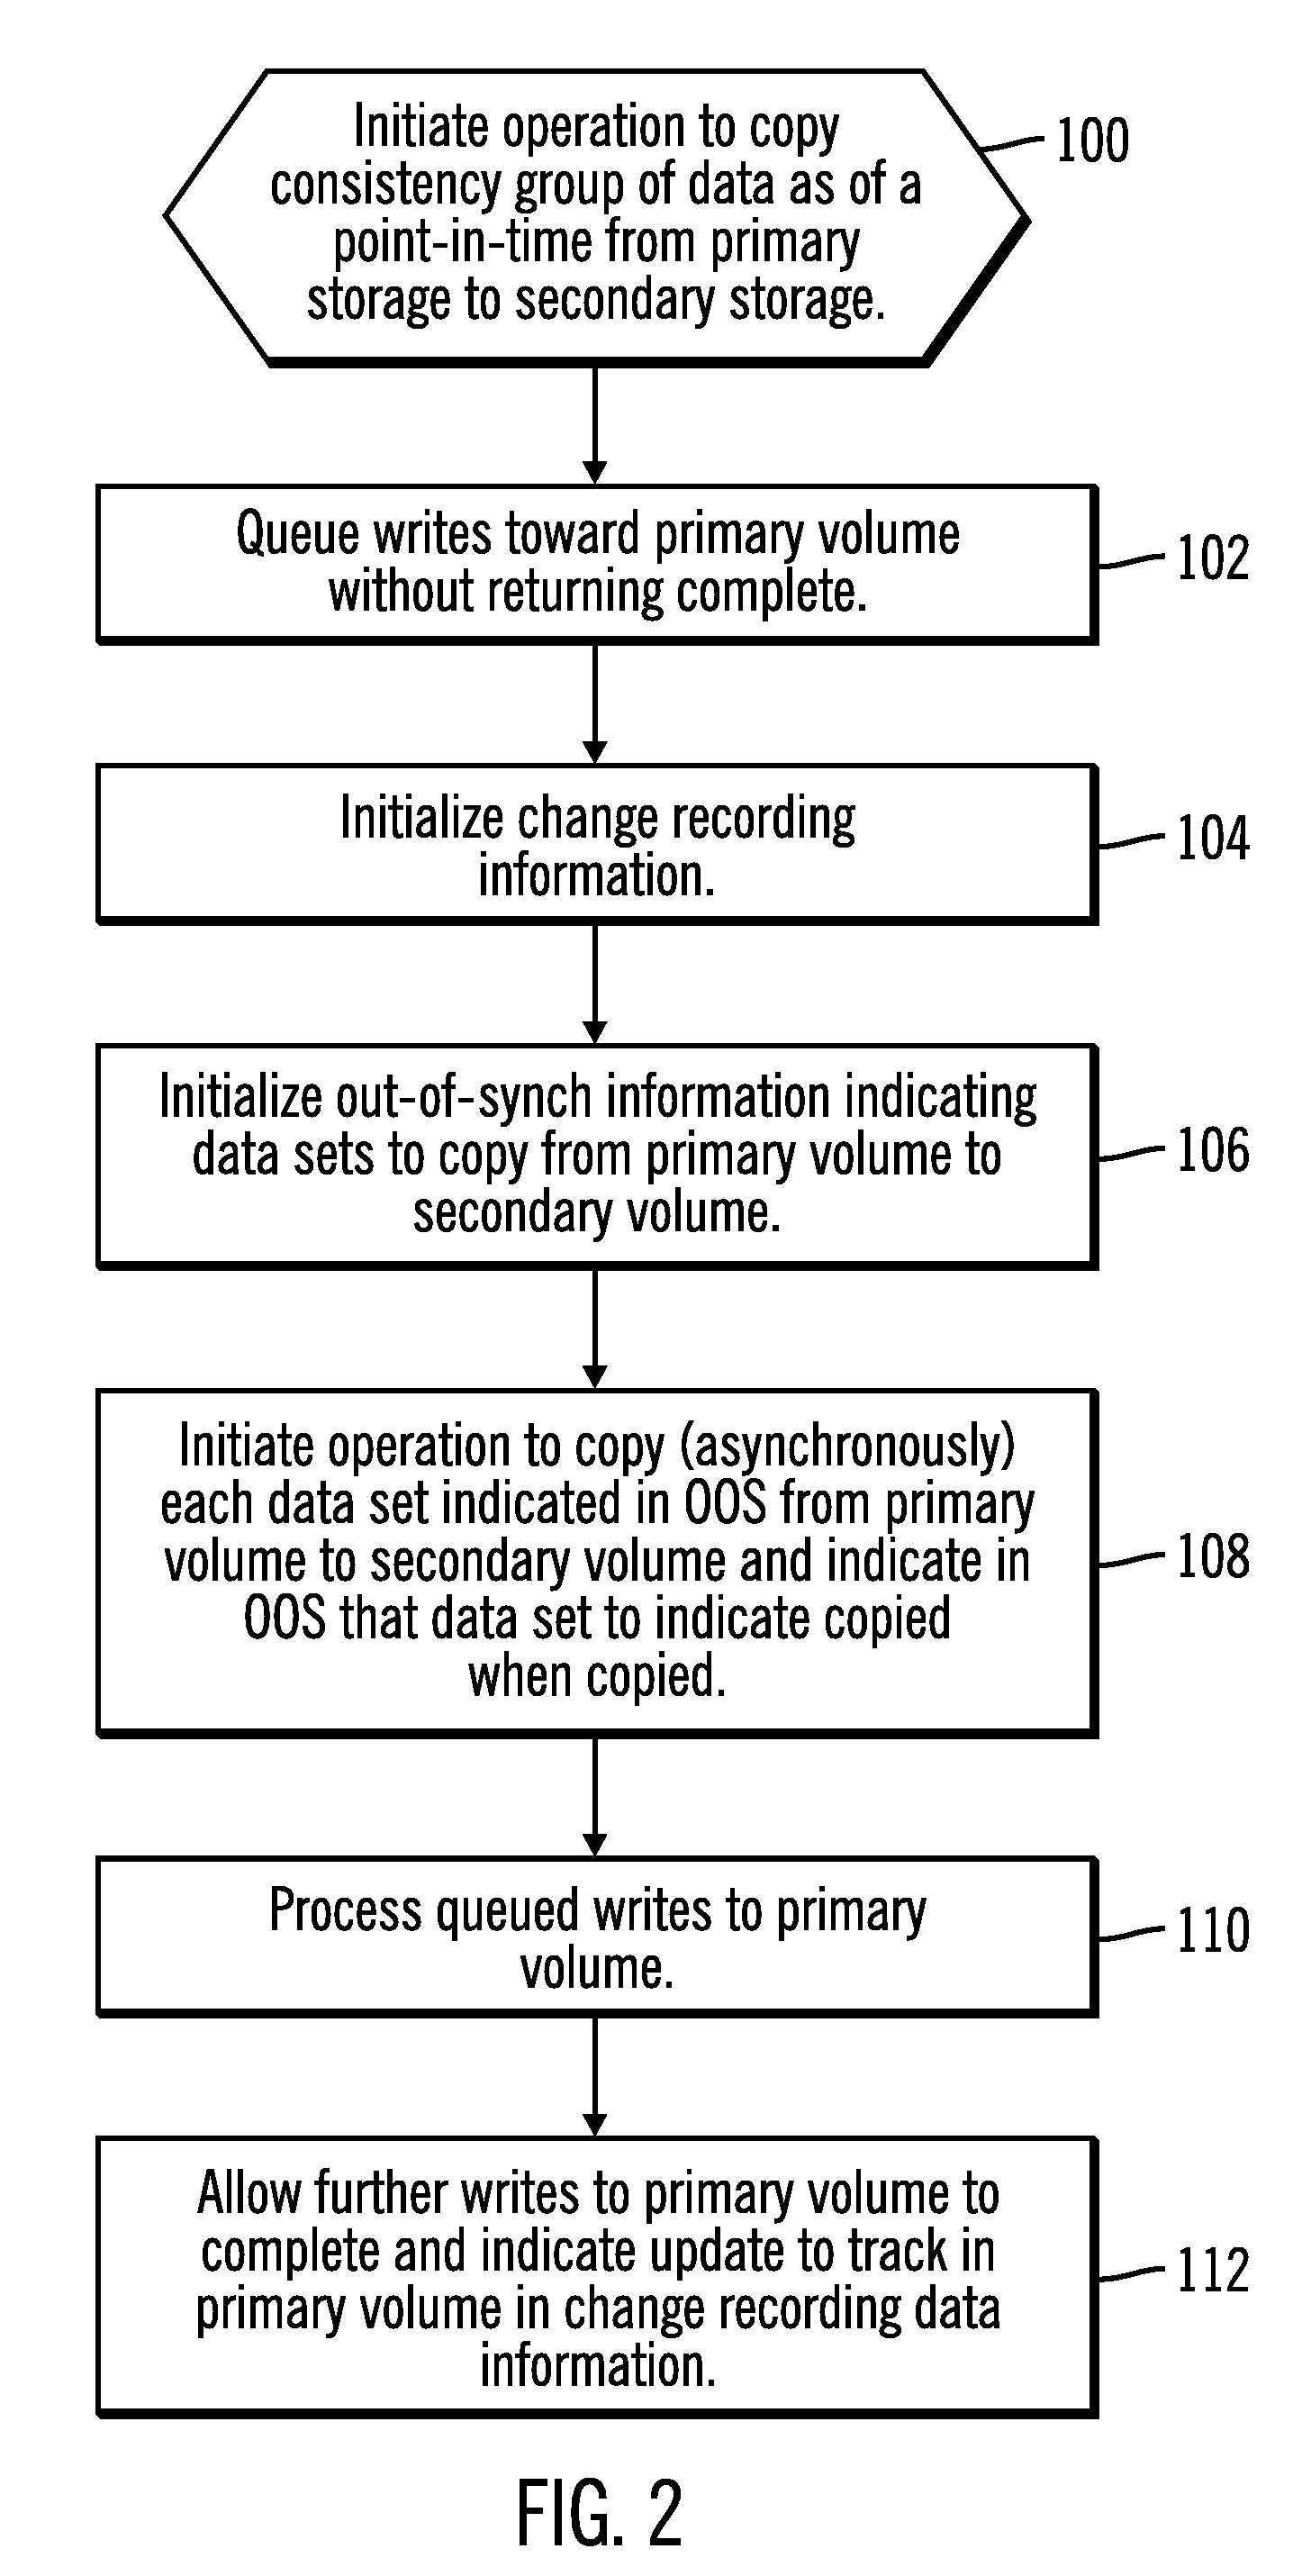 Managing write requests to data sets in a primary volume subject to being copied to a secondary volume